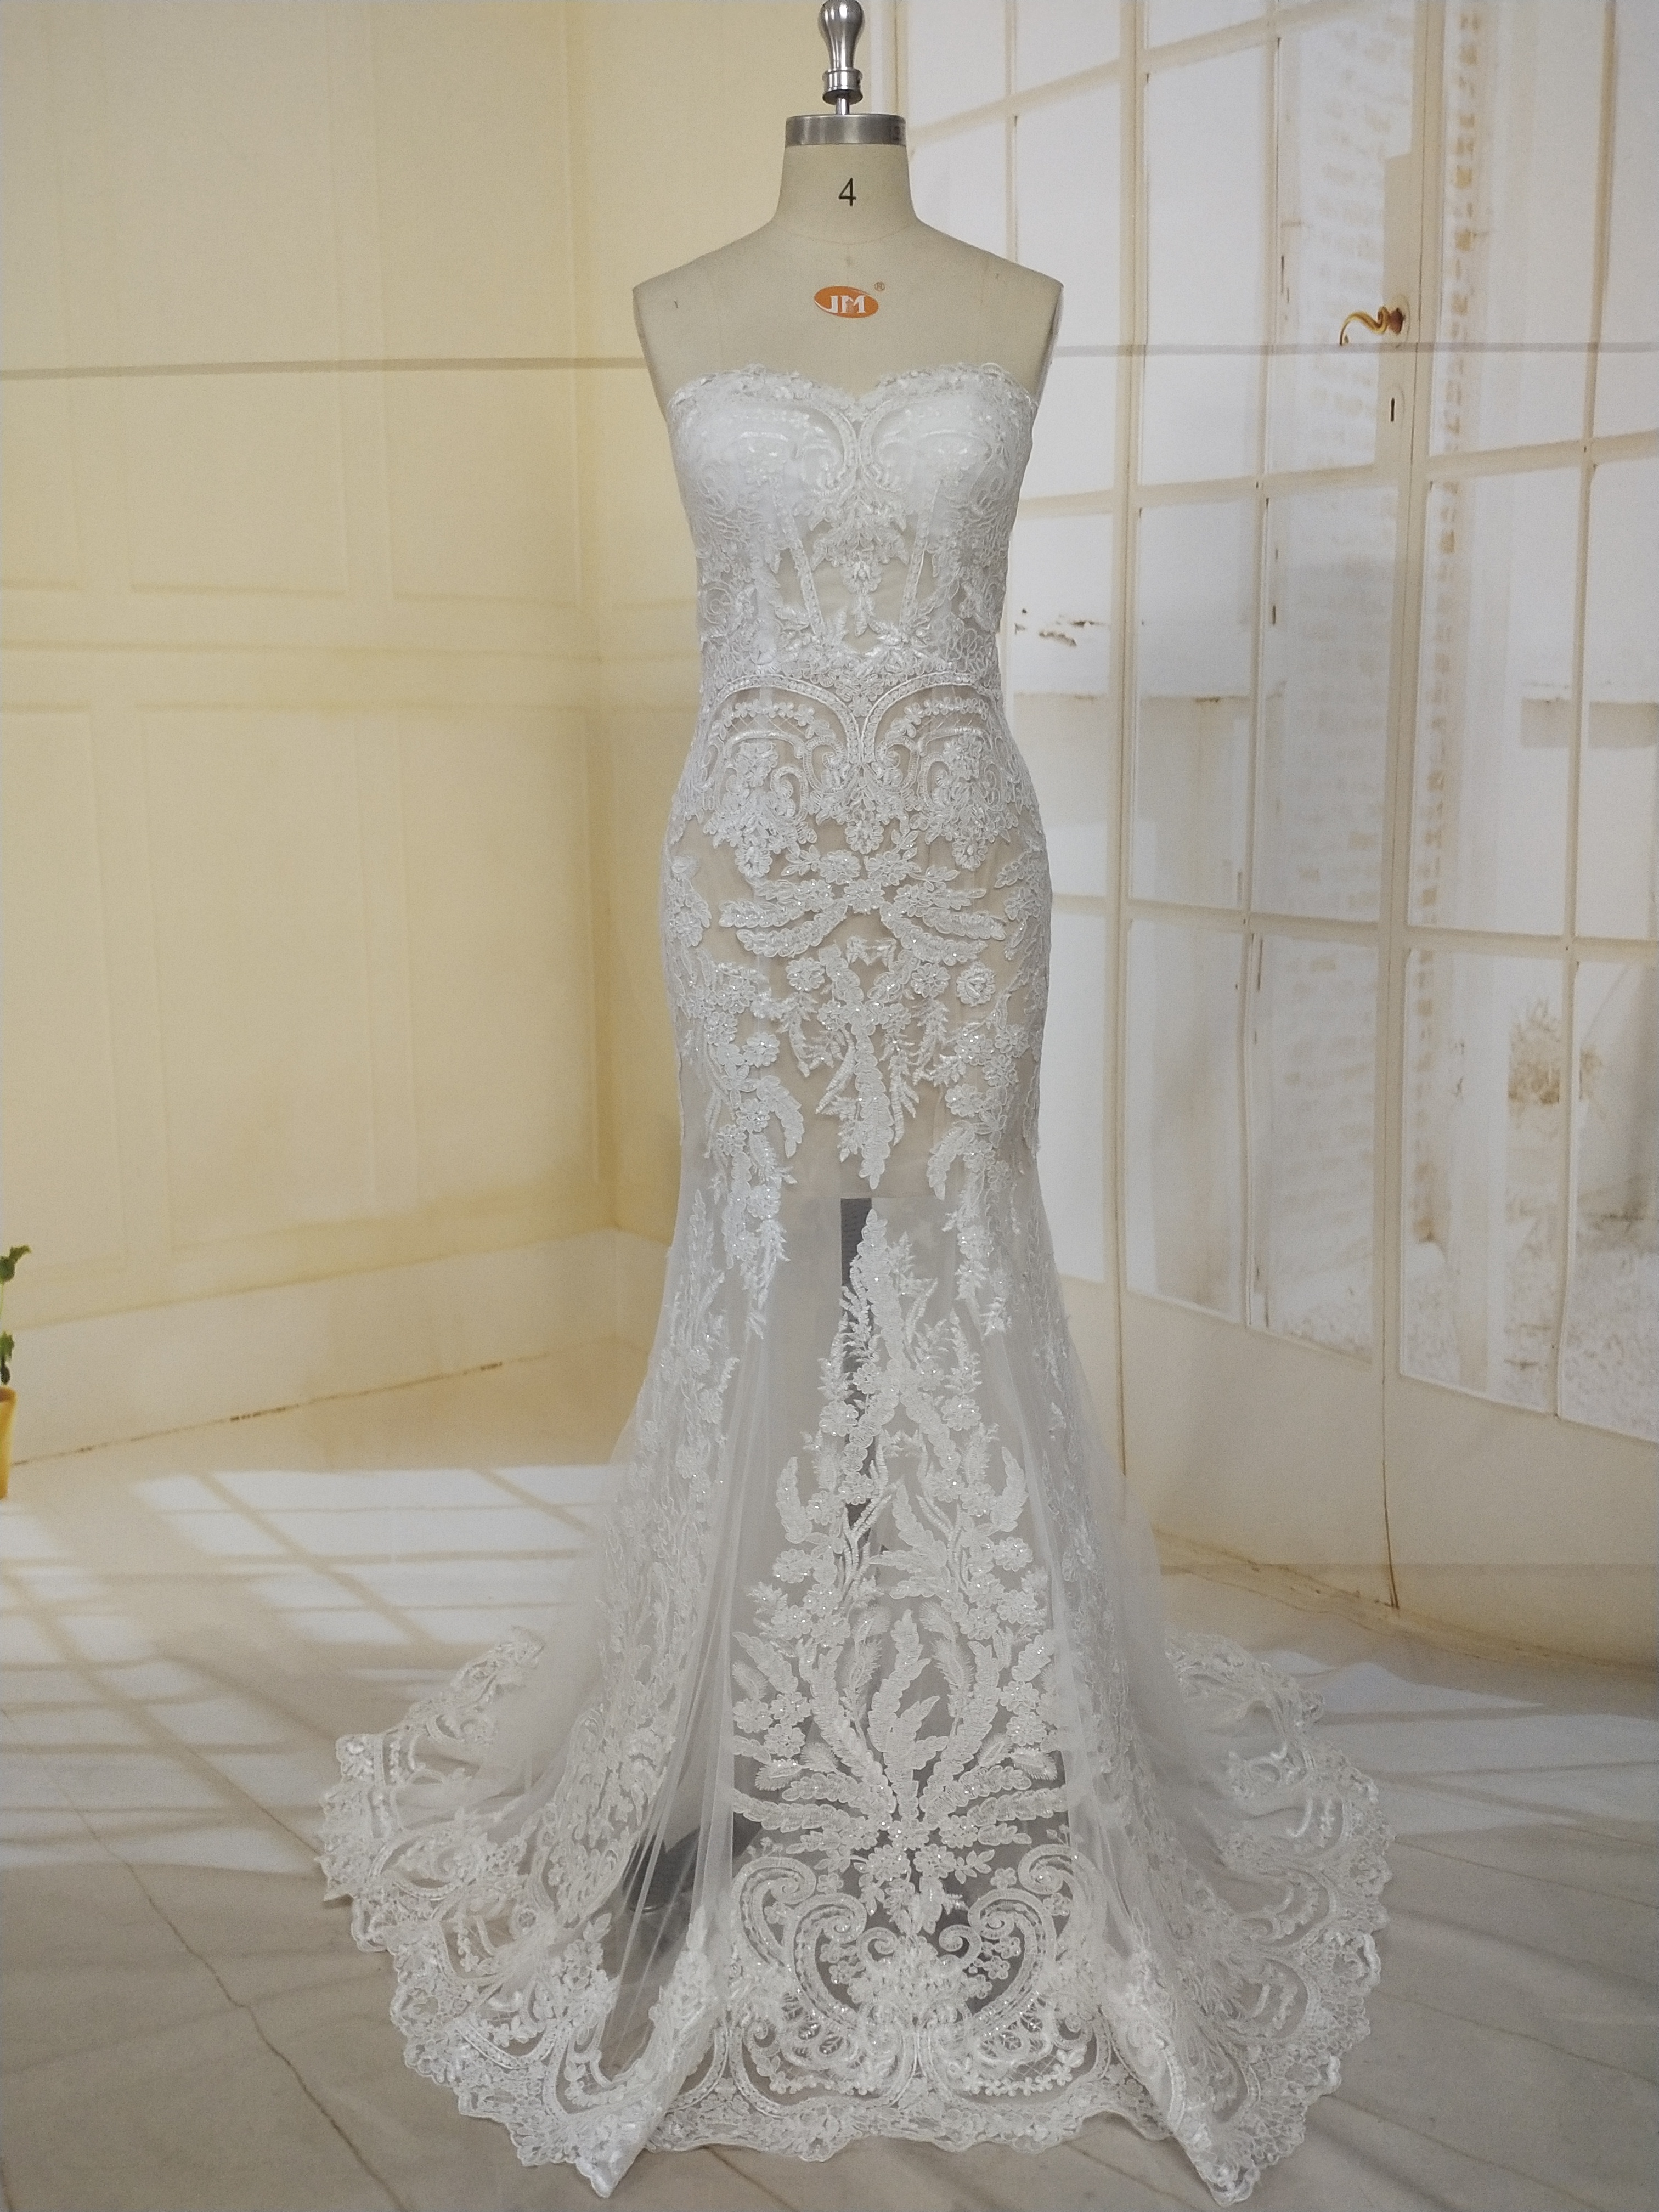 C2021-NicoleG - sexy strapless lace embroidered wedding gown from darius cordell